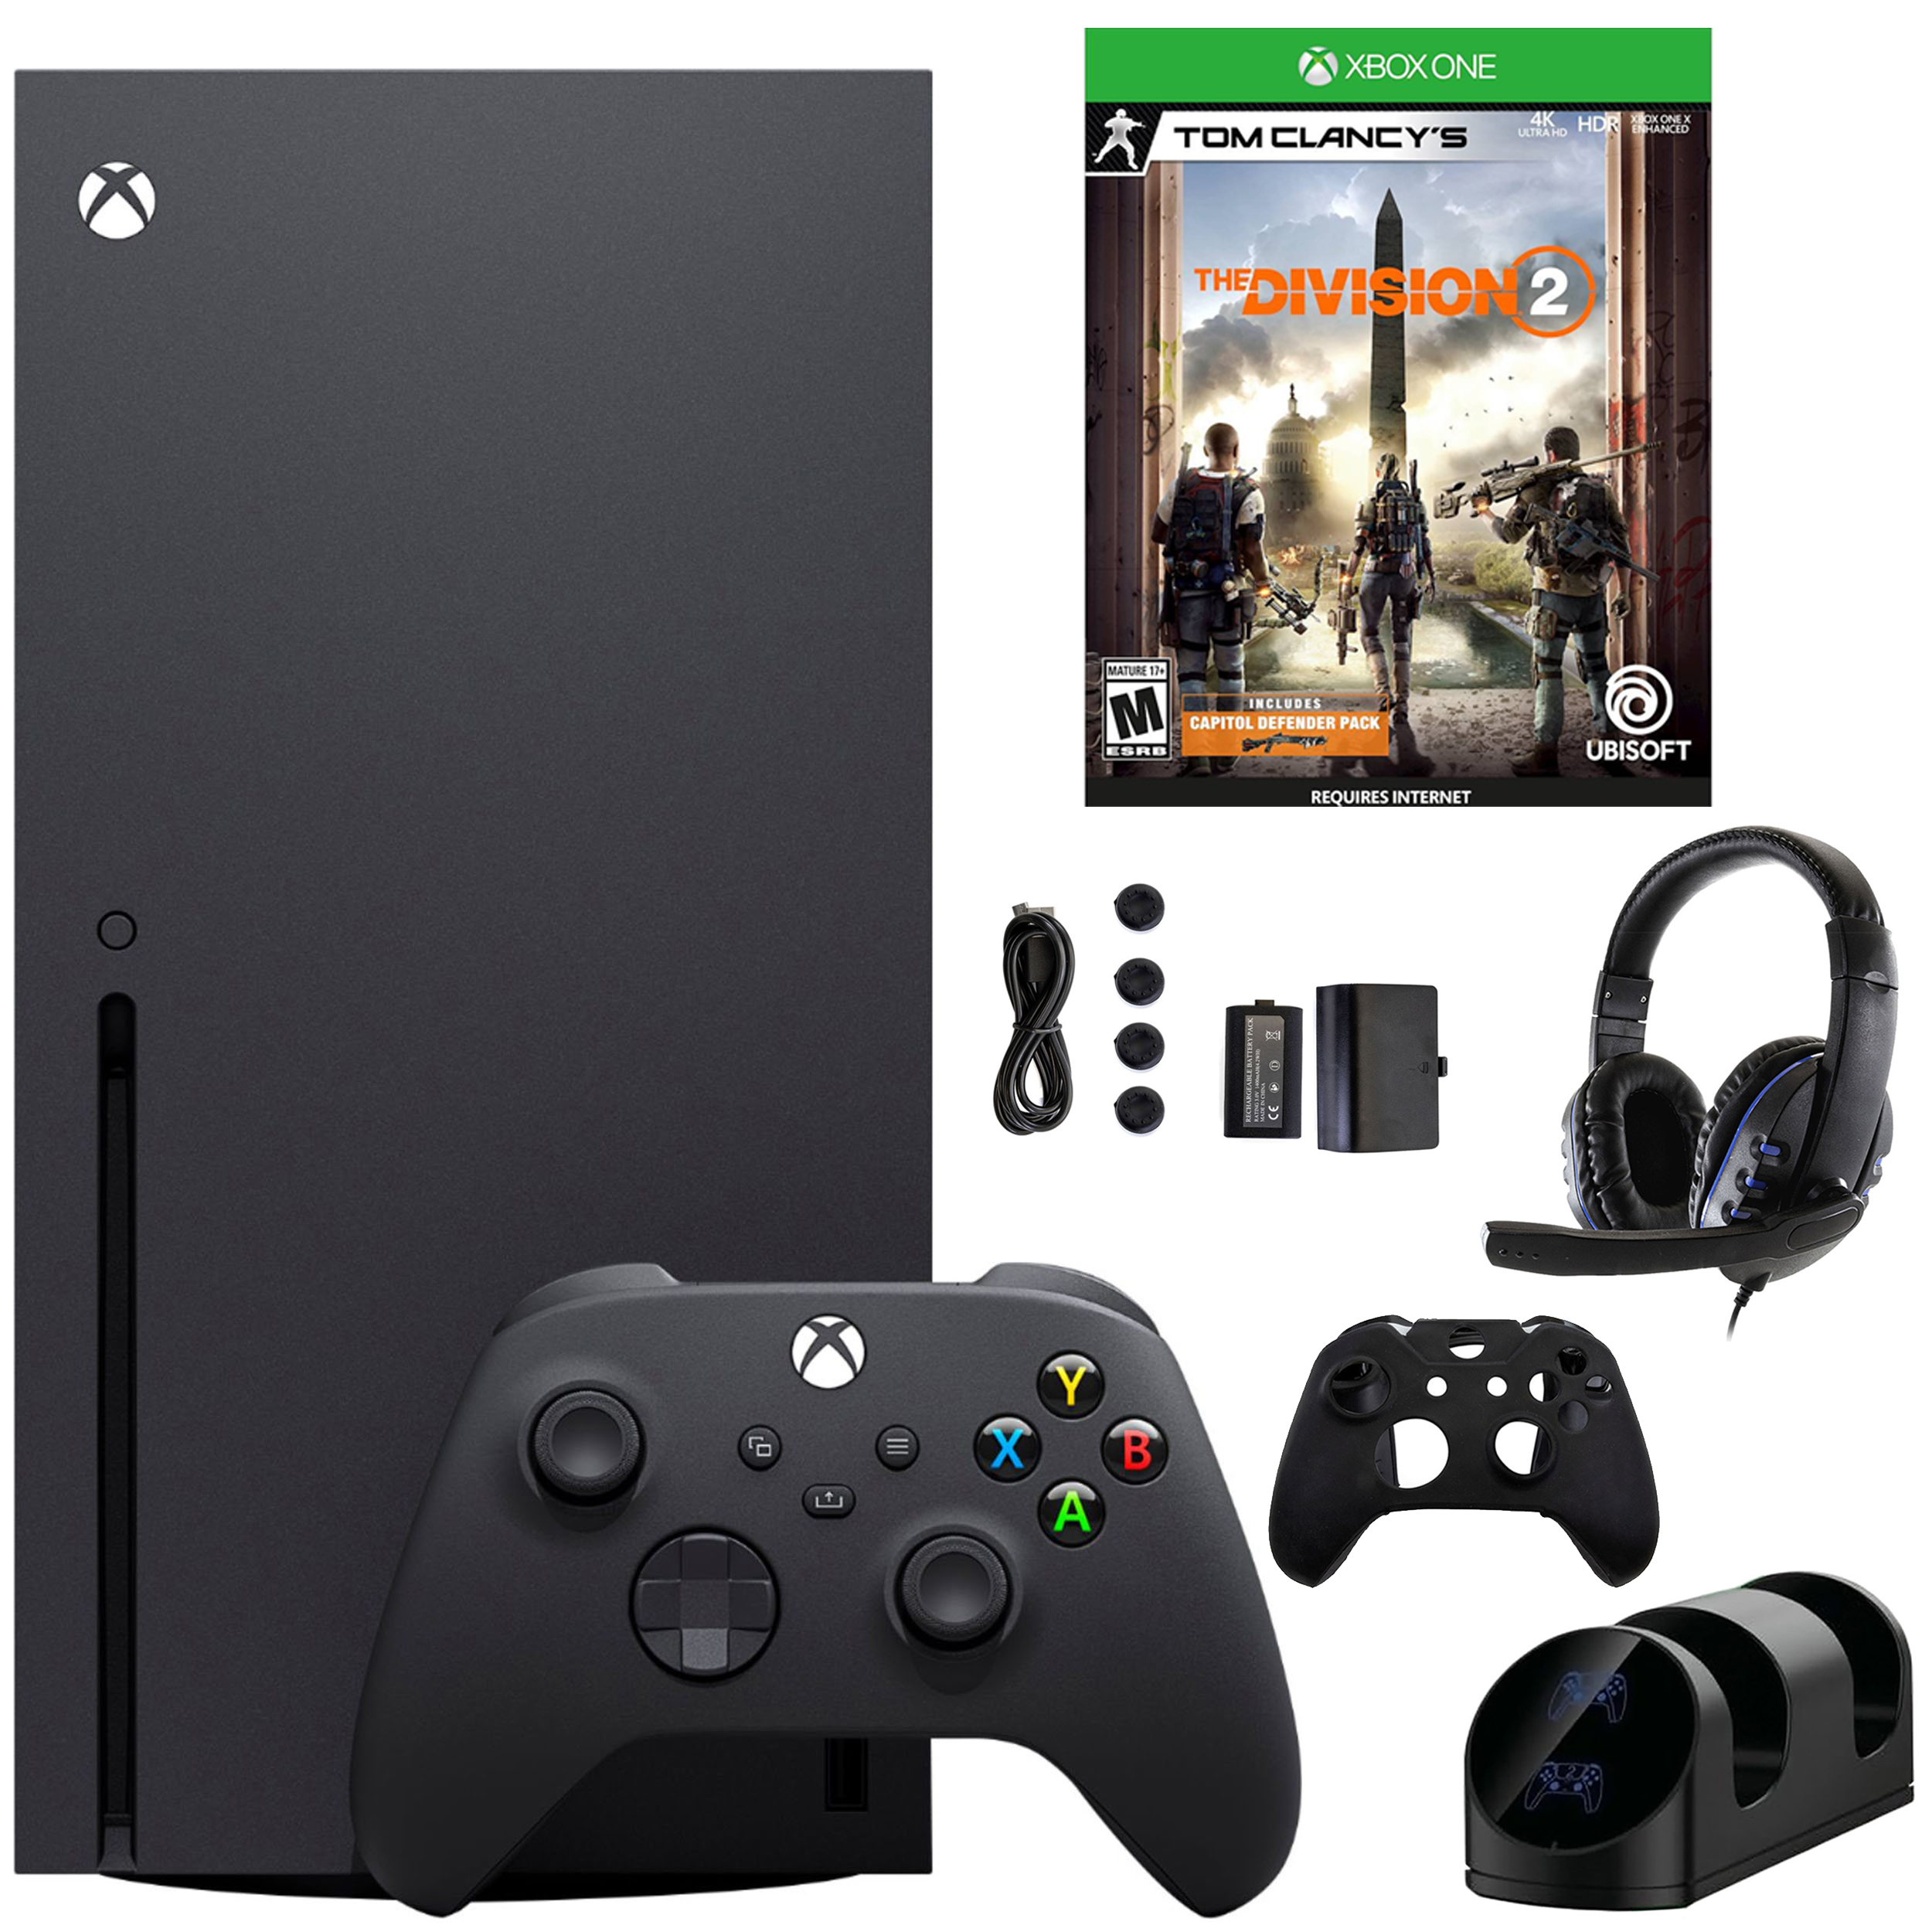 Microsoft Xbox Series X 1TB Console with Division 2 and Accessories Kit